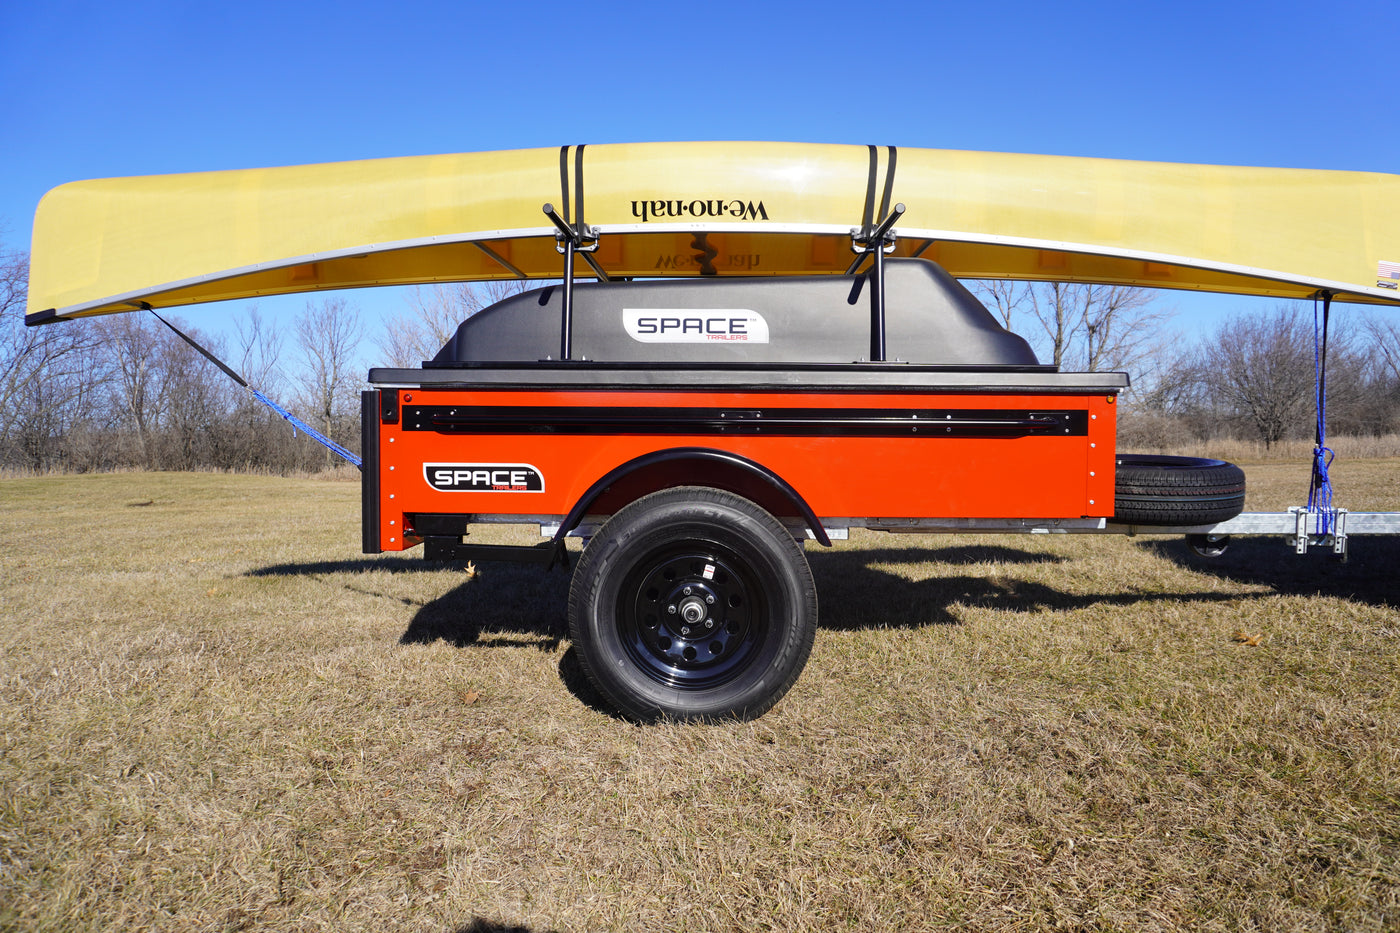 The Wenonah Adventure Trailer by SPACE Trailers